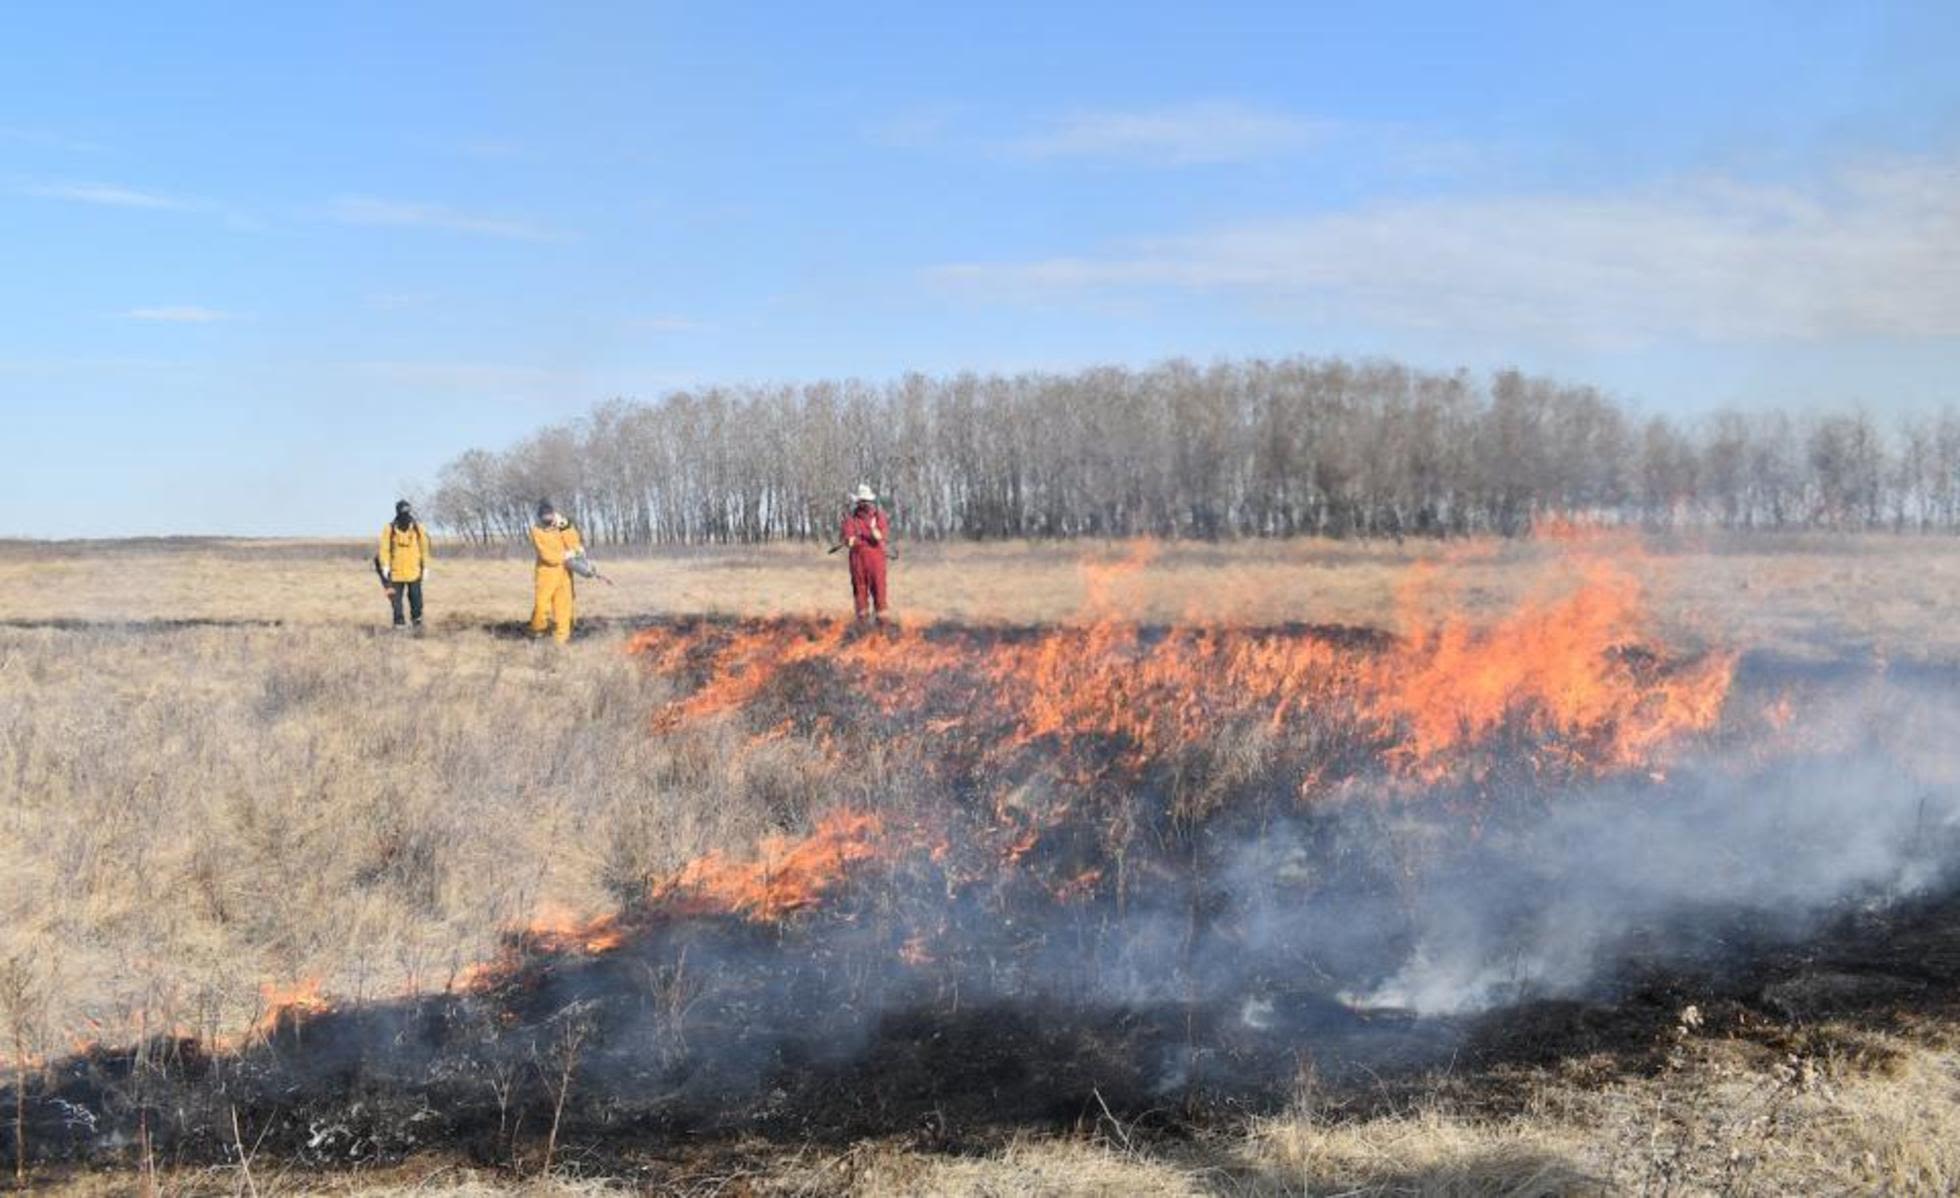 'Good fire': Prescribed burning can prevent catastrophic wildfires in the future